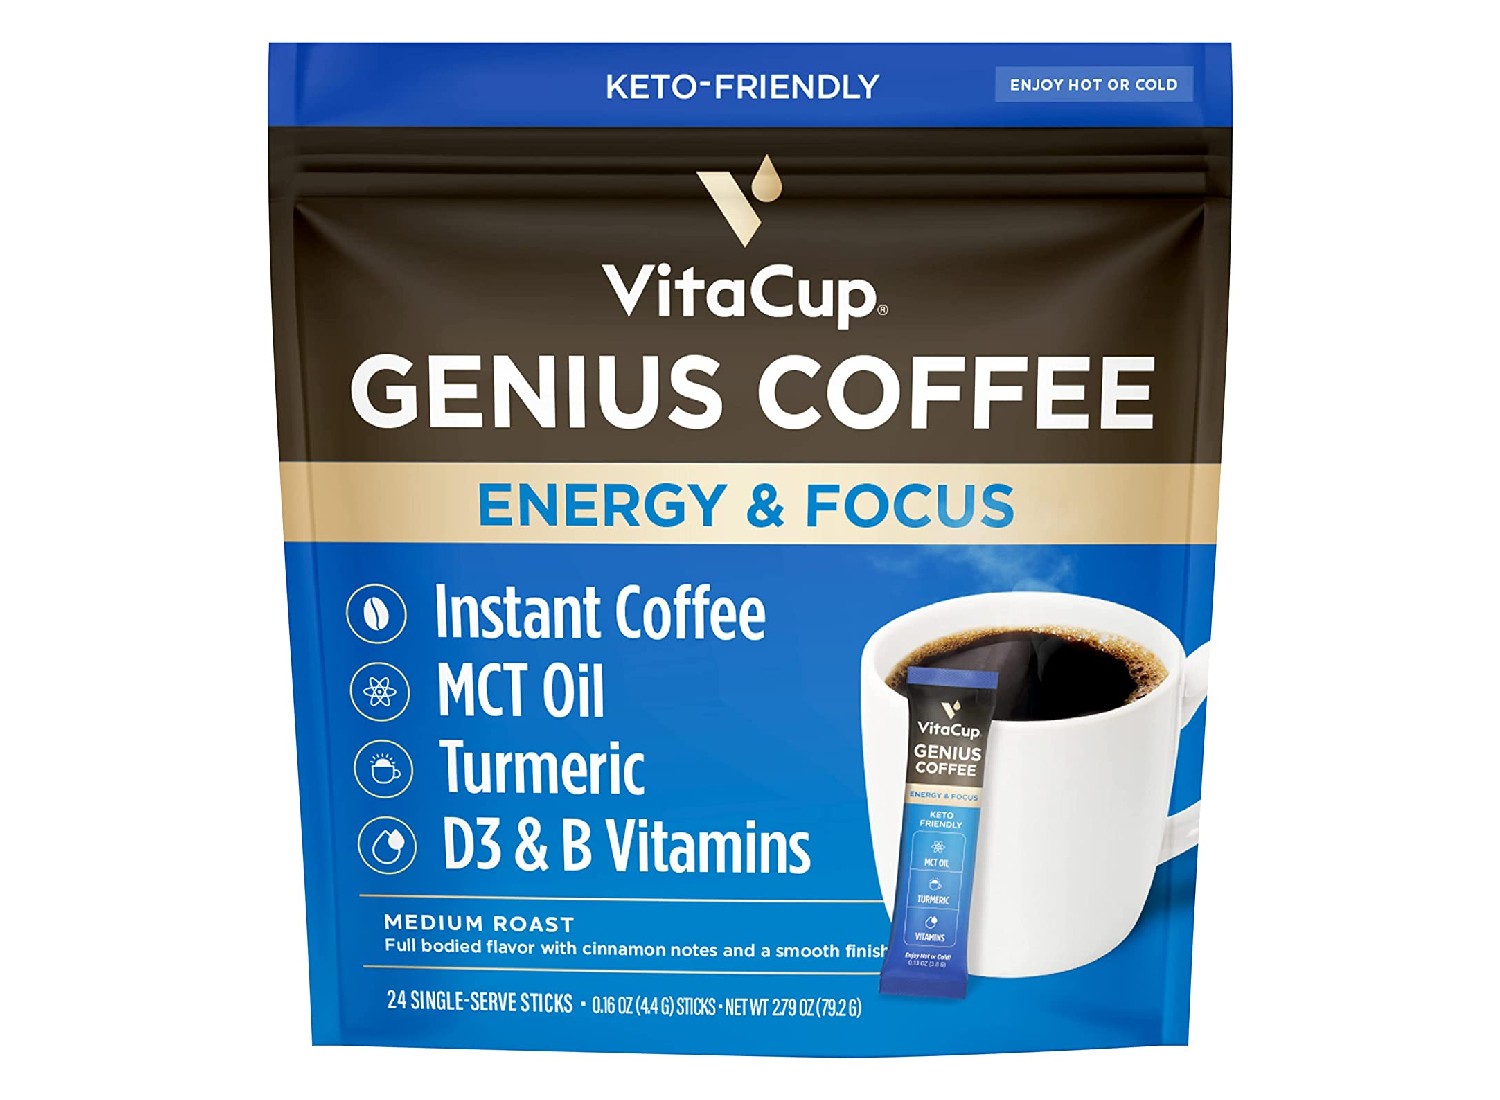 The VitaCup Genius Instant Coffee Packet sold on Amazon